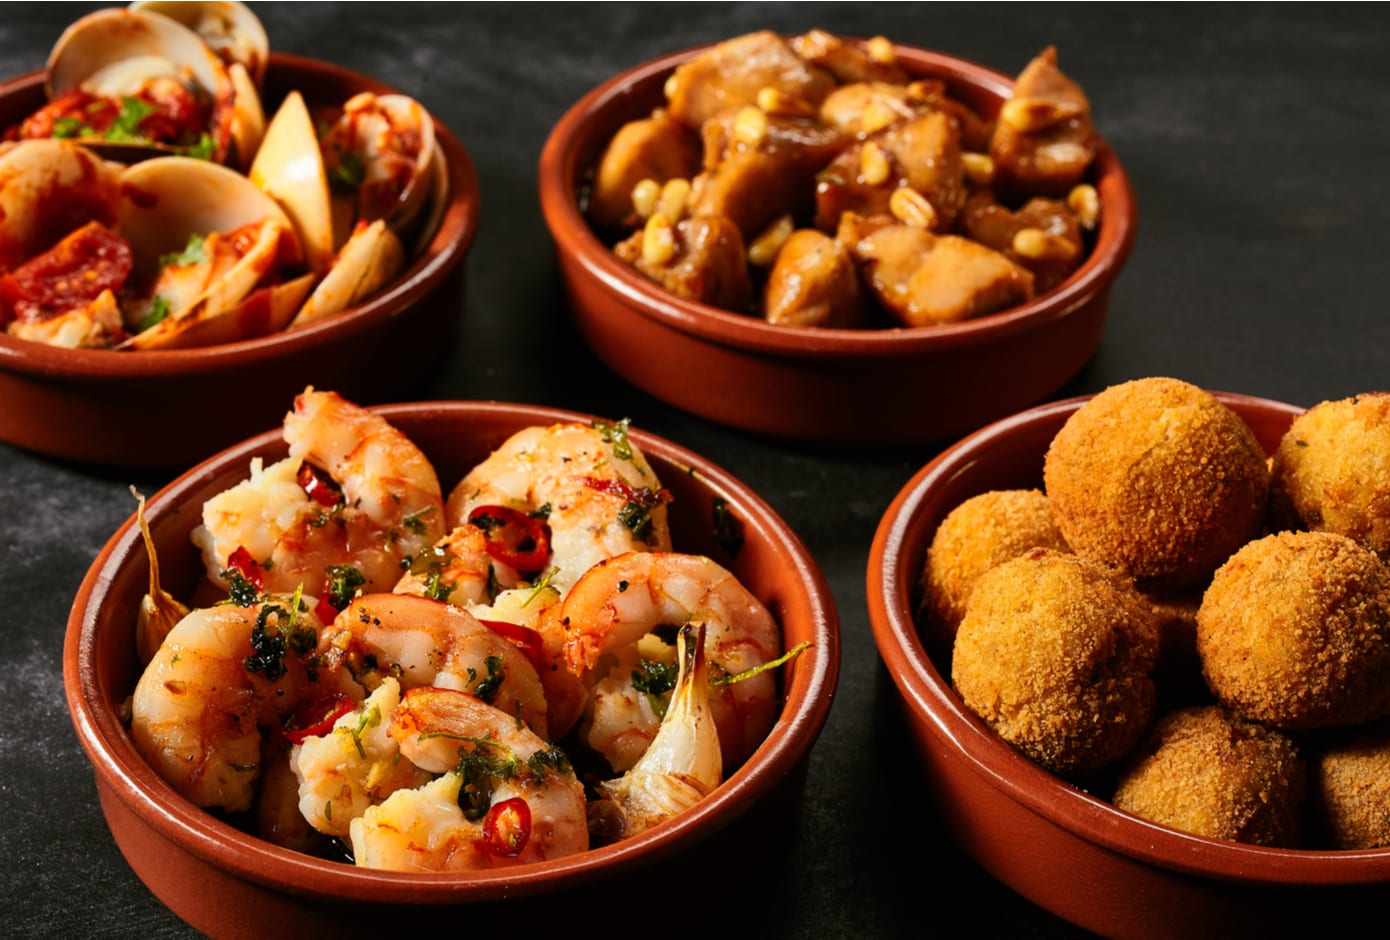 Four red ceramic bowls filled with Spanish tapas.